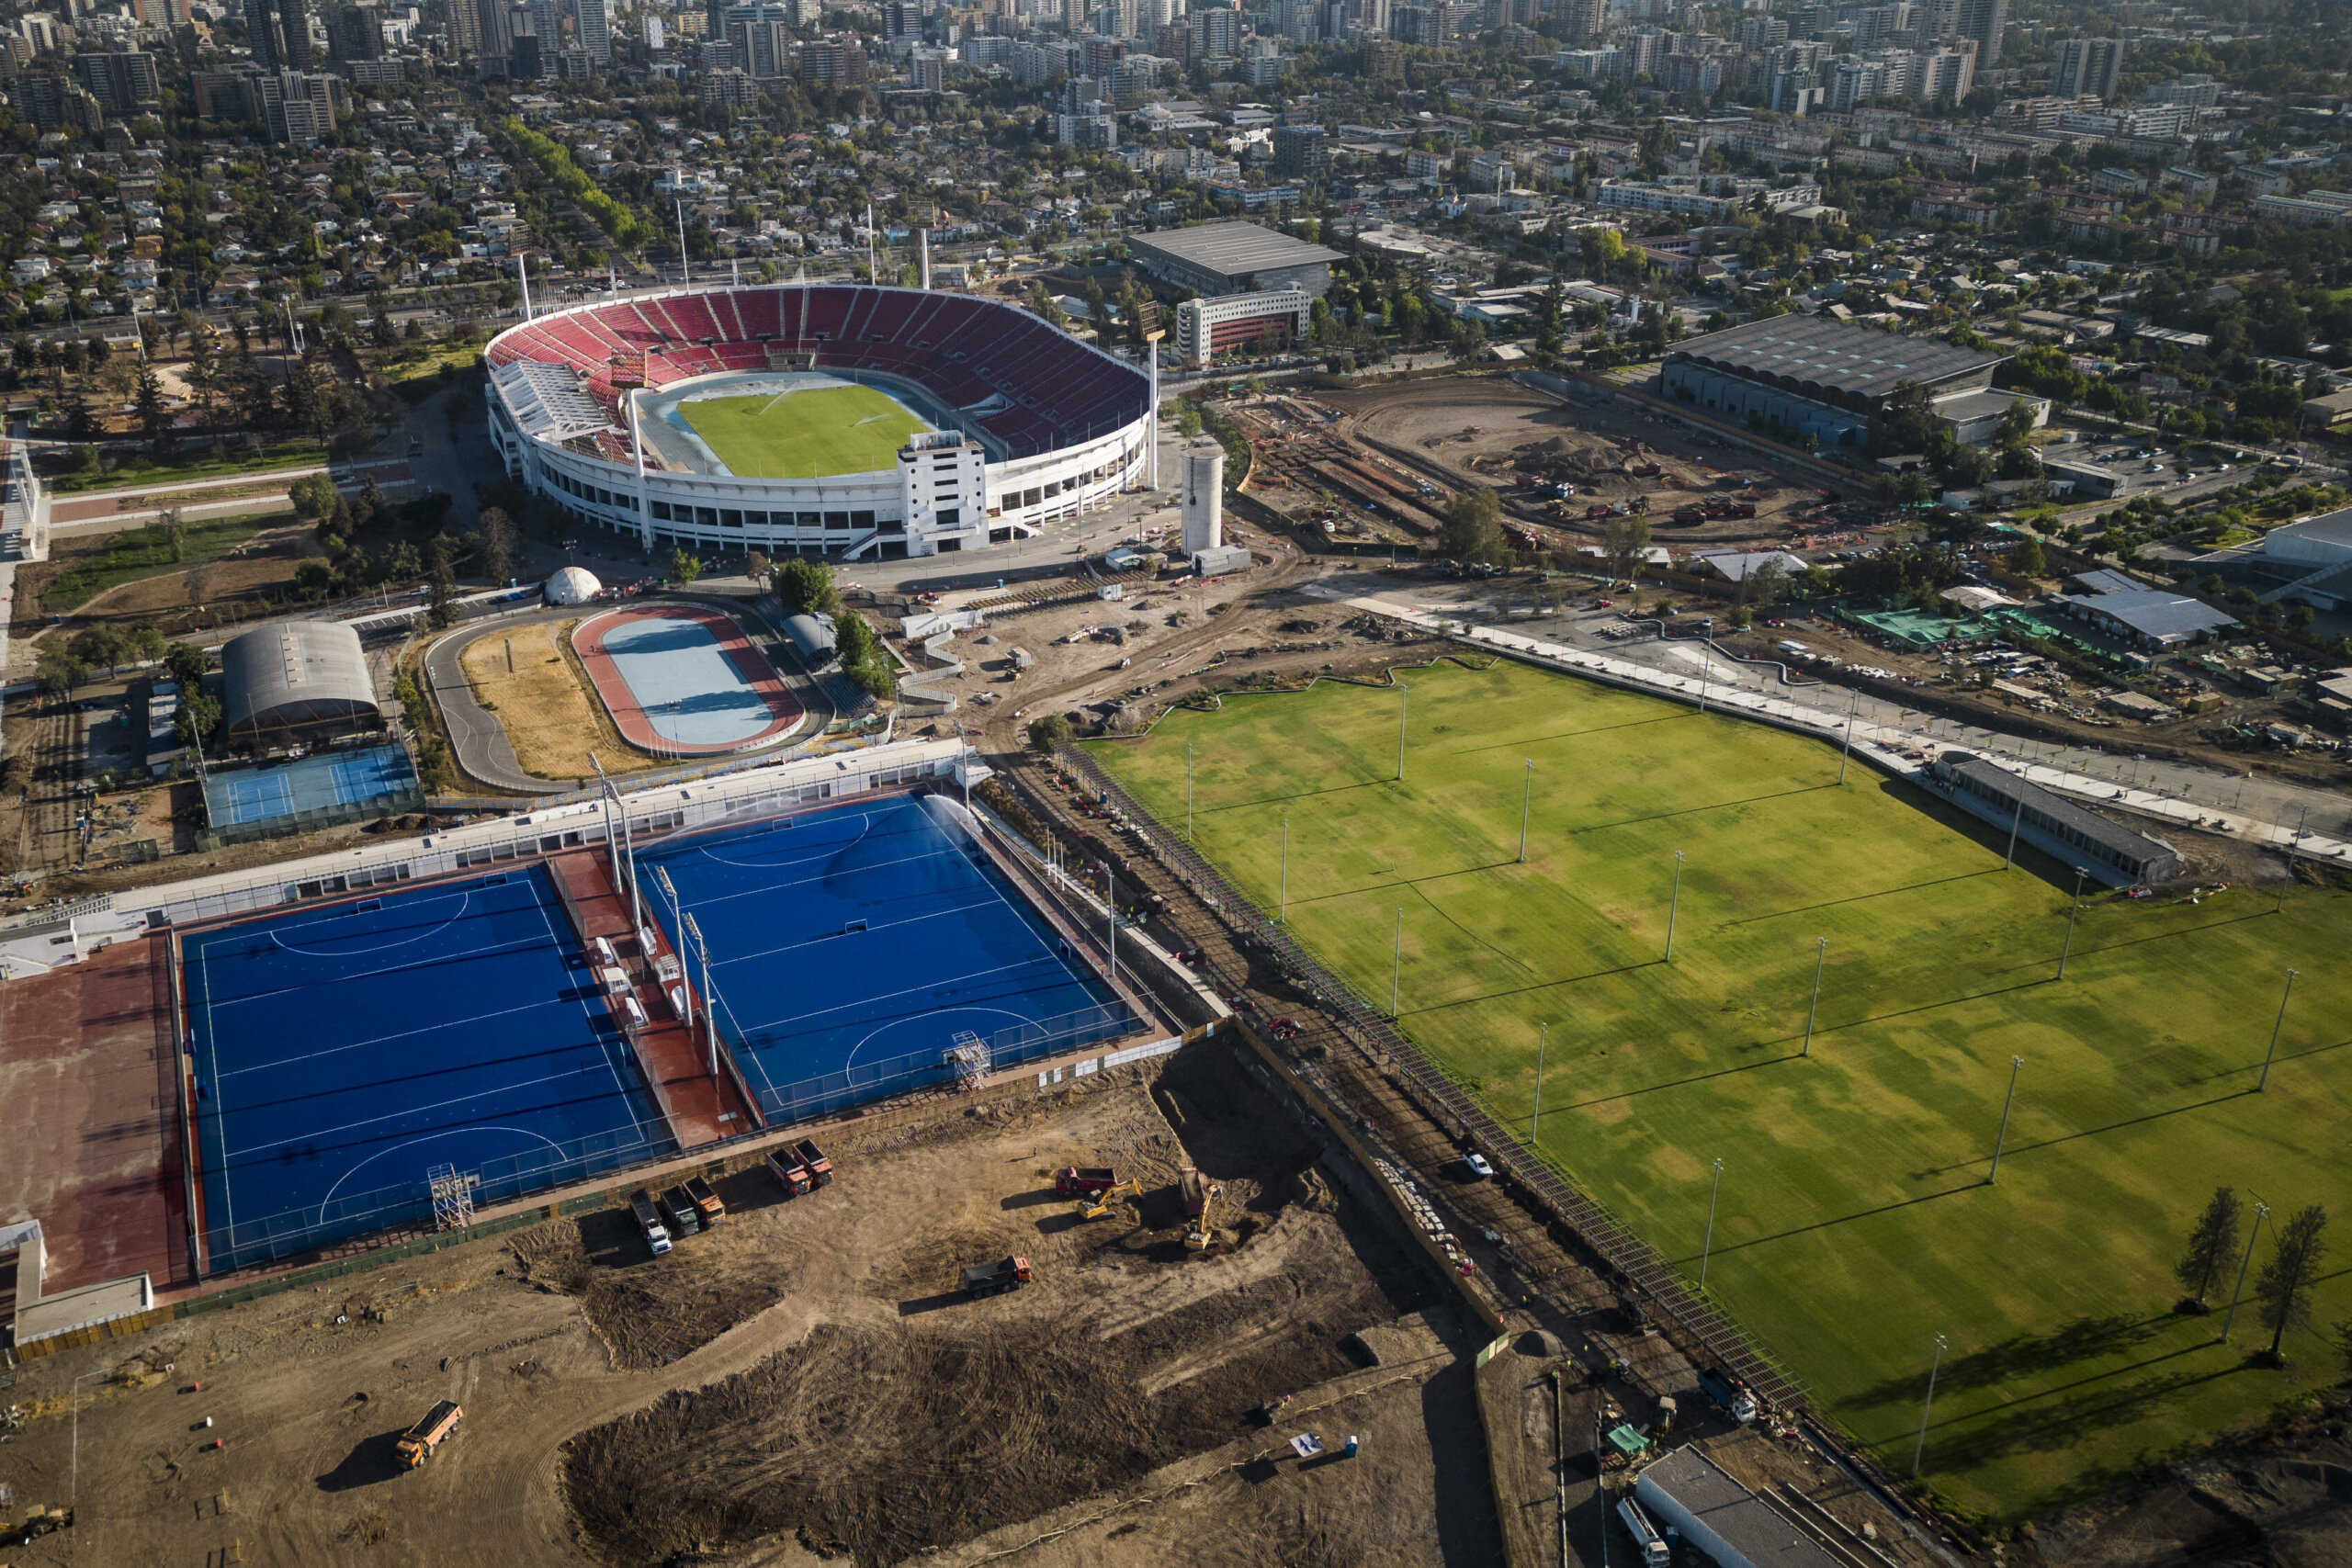 Soccer at Pan American Games 2023 preview: Full schedule and how